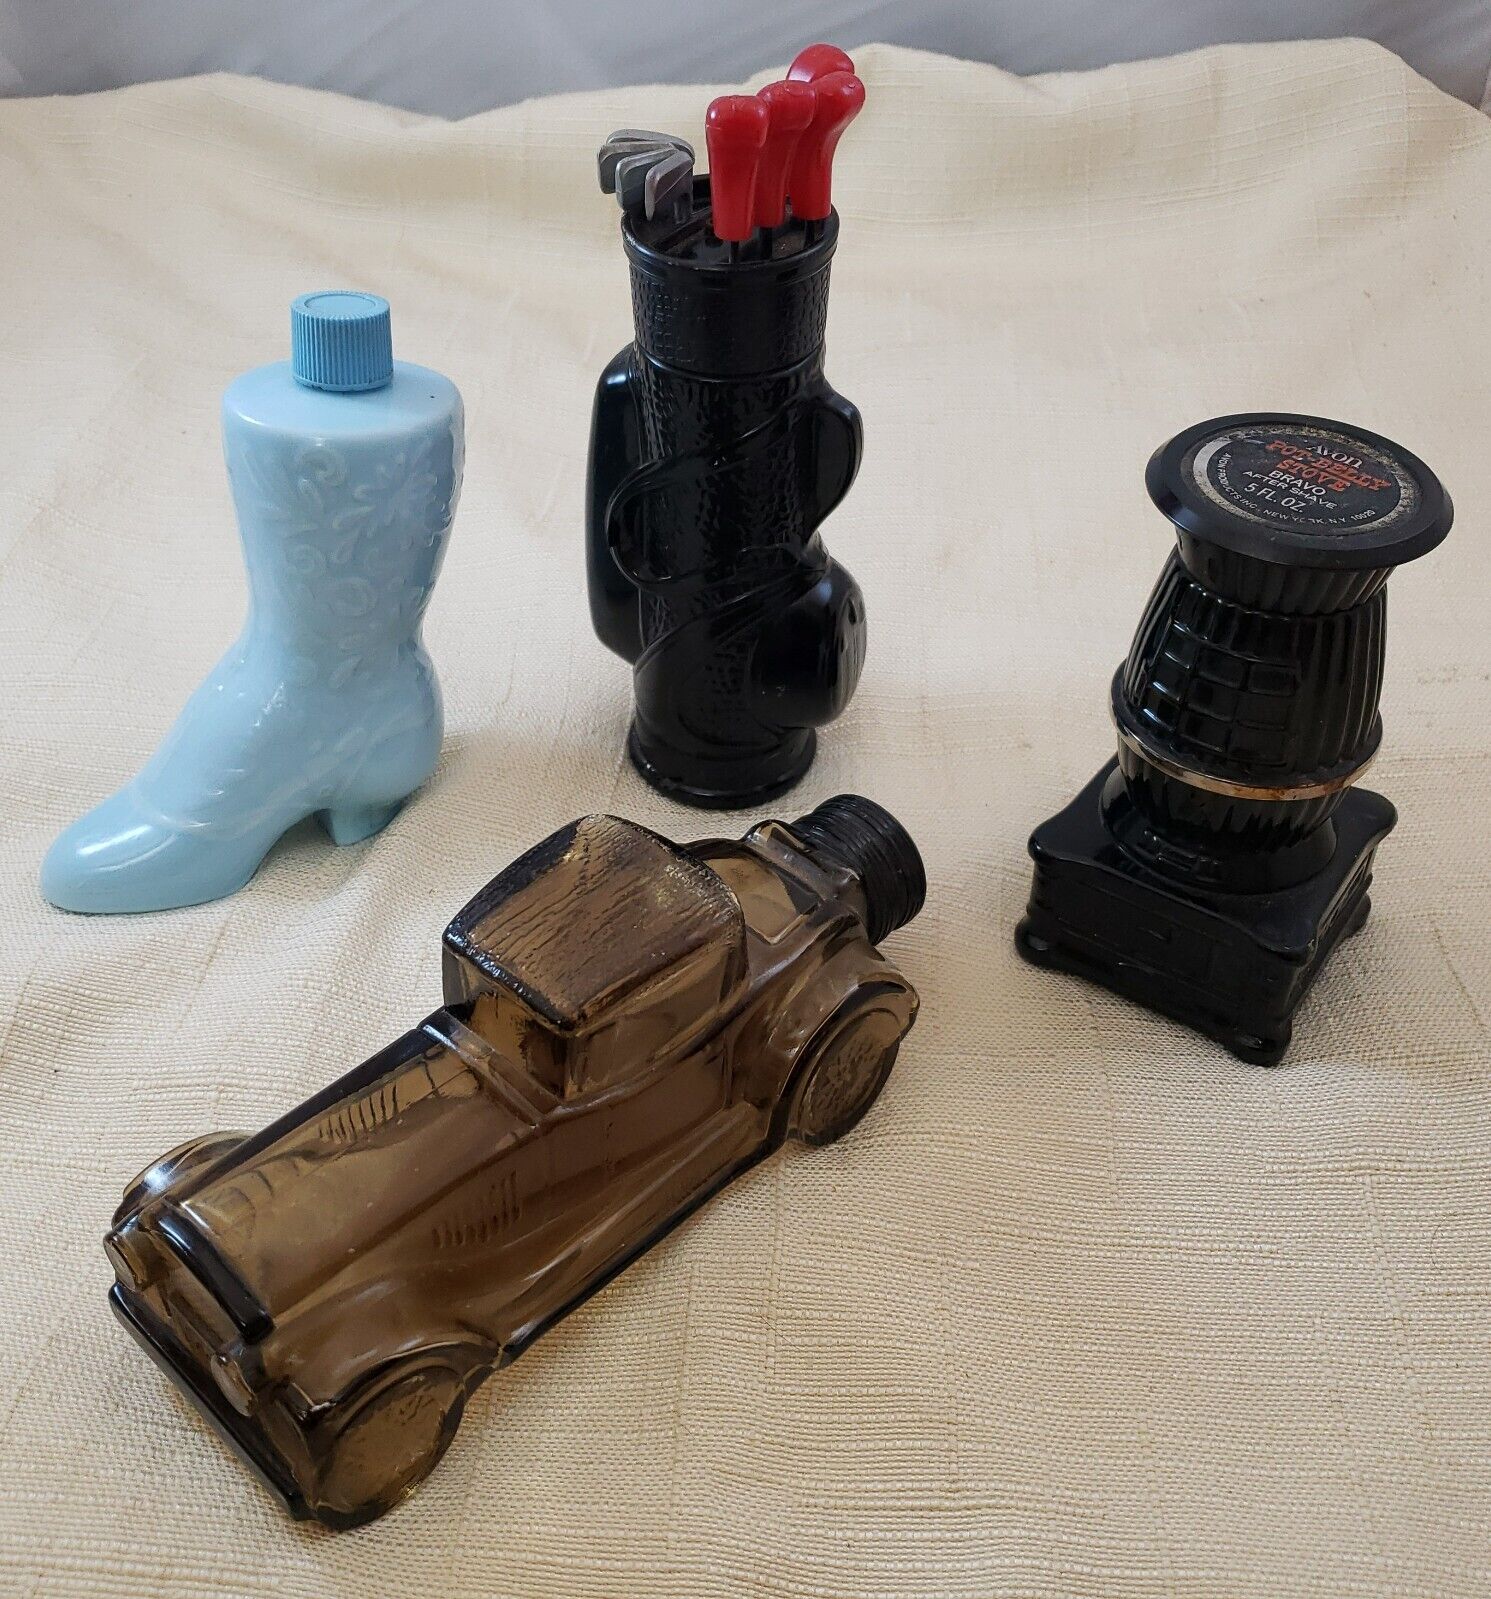 Lot of Empty Avon Cologne/Aftershave Bottles Shoe Car Golf Clubs Pot-Belly Stove